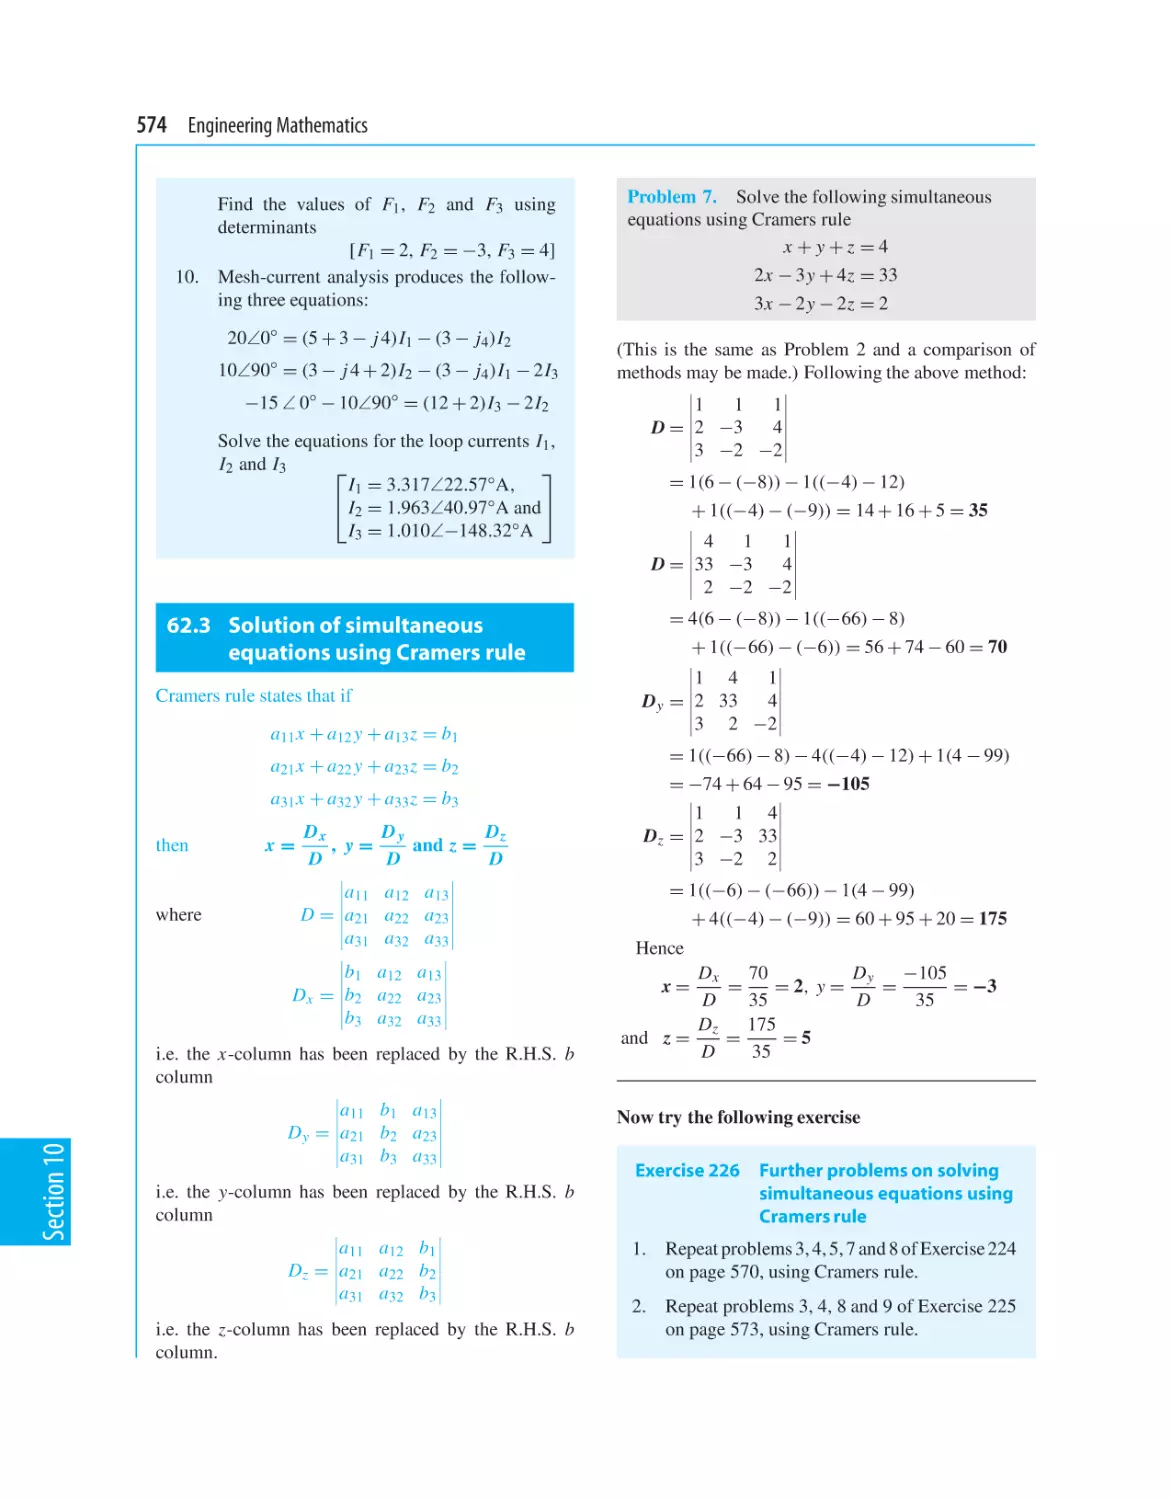 62.3 Solution of simultaneous equations using Cramers rule